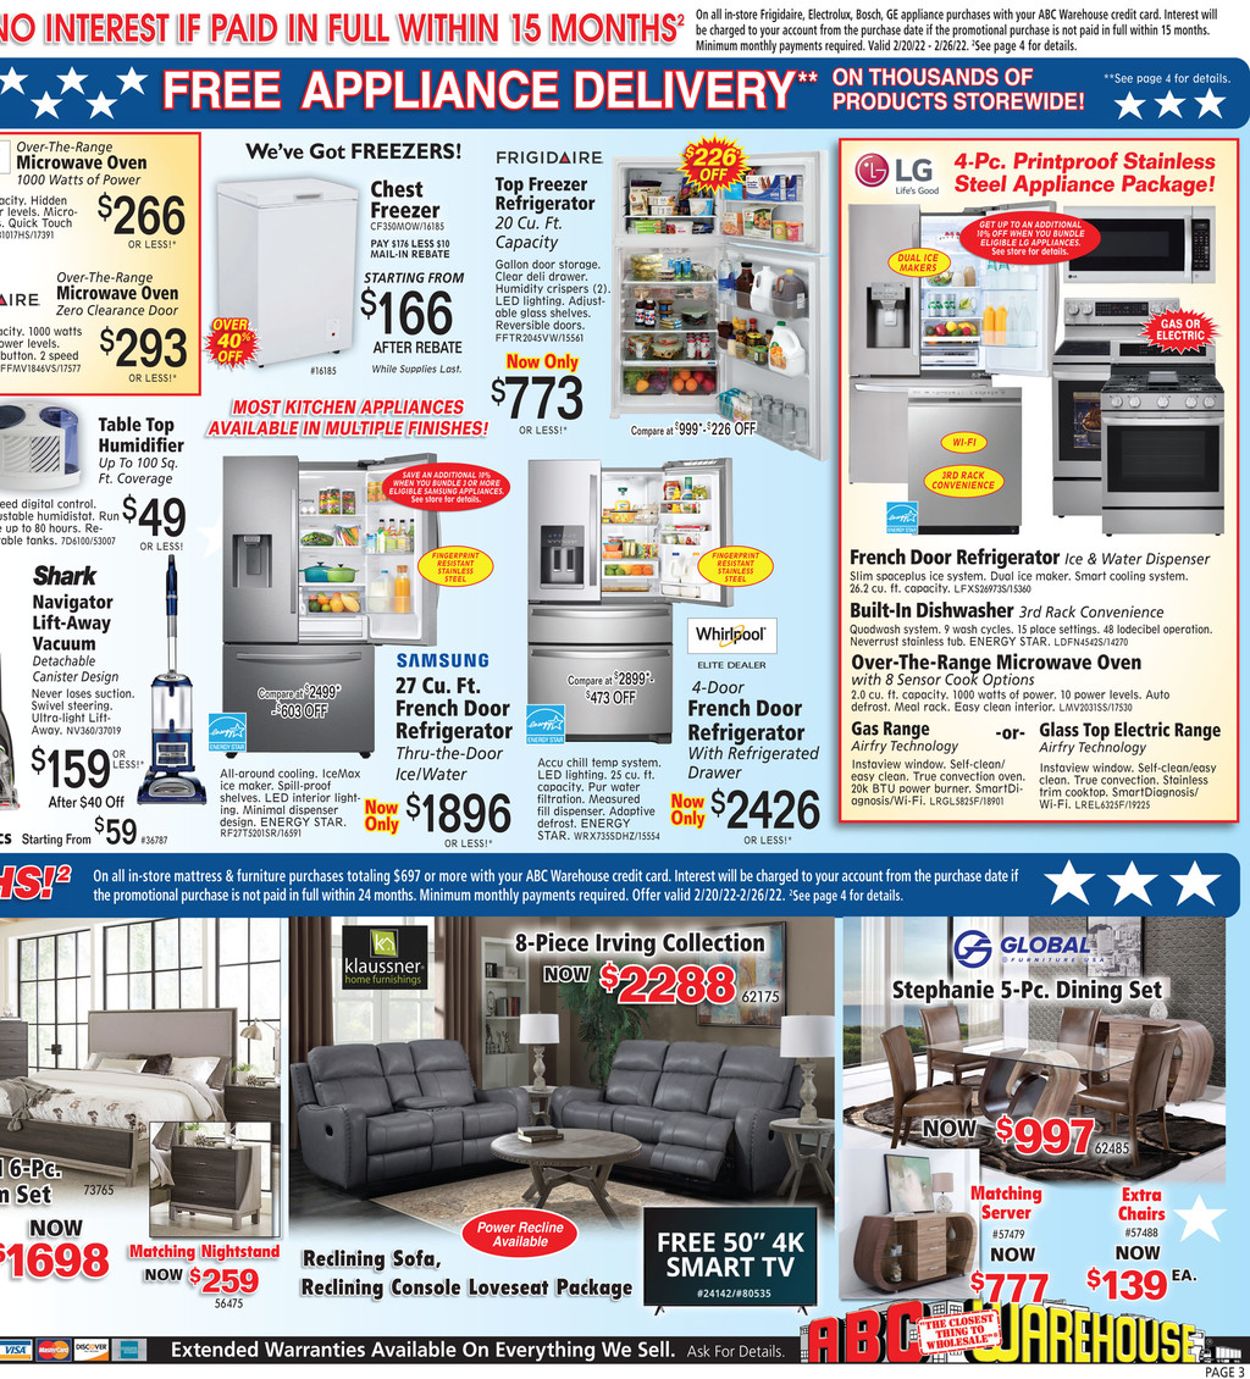 abc-warehouse-current-weekly-ad-02-20-02-26-2022-3-frequent-ads